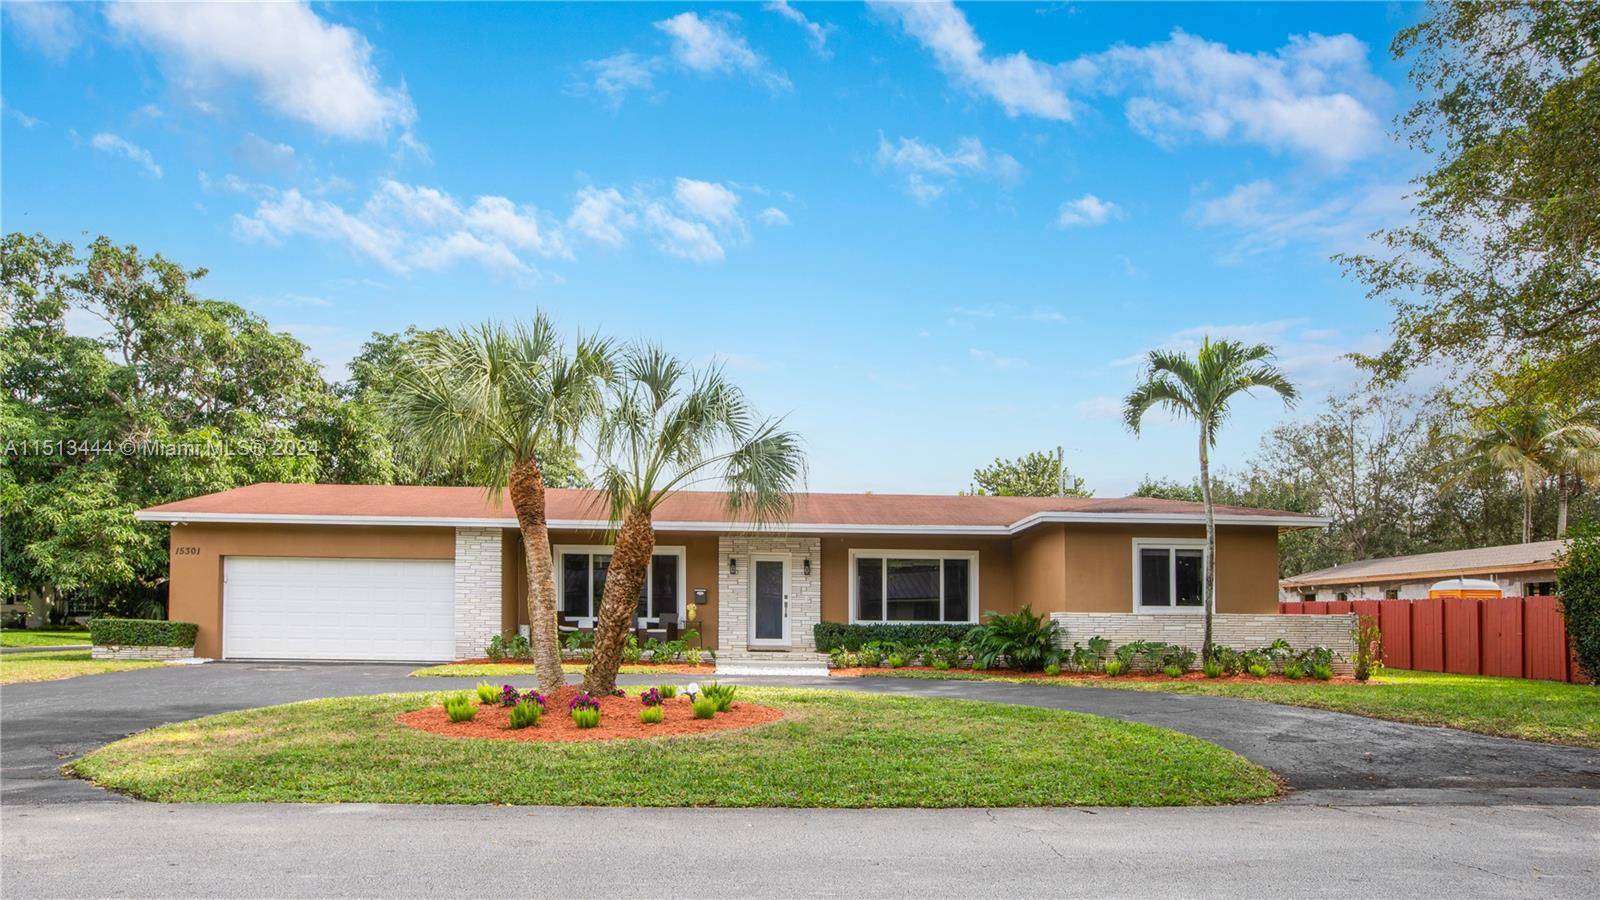 Welcome to your dream home in the serene community of Palmetto Bay.